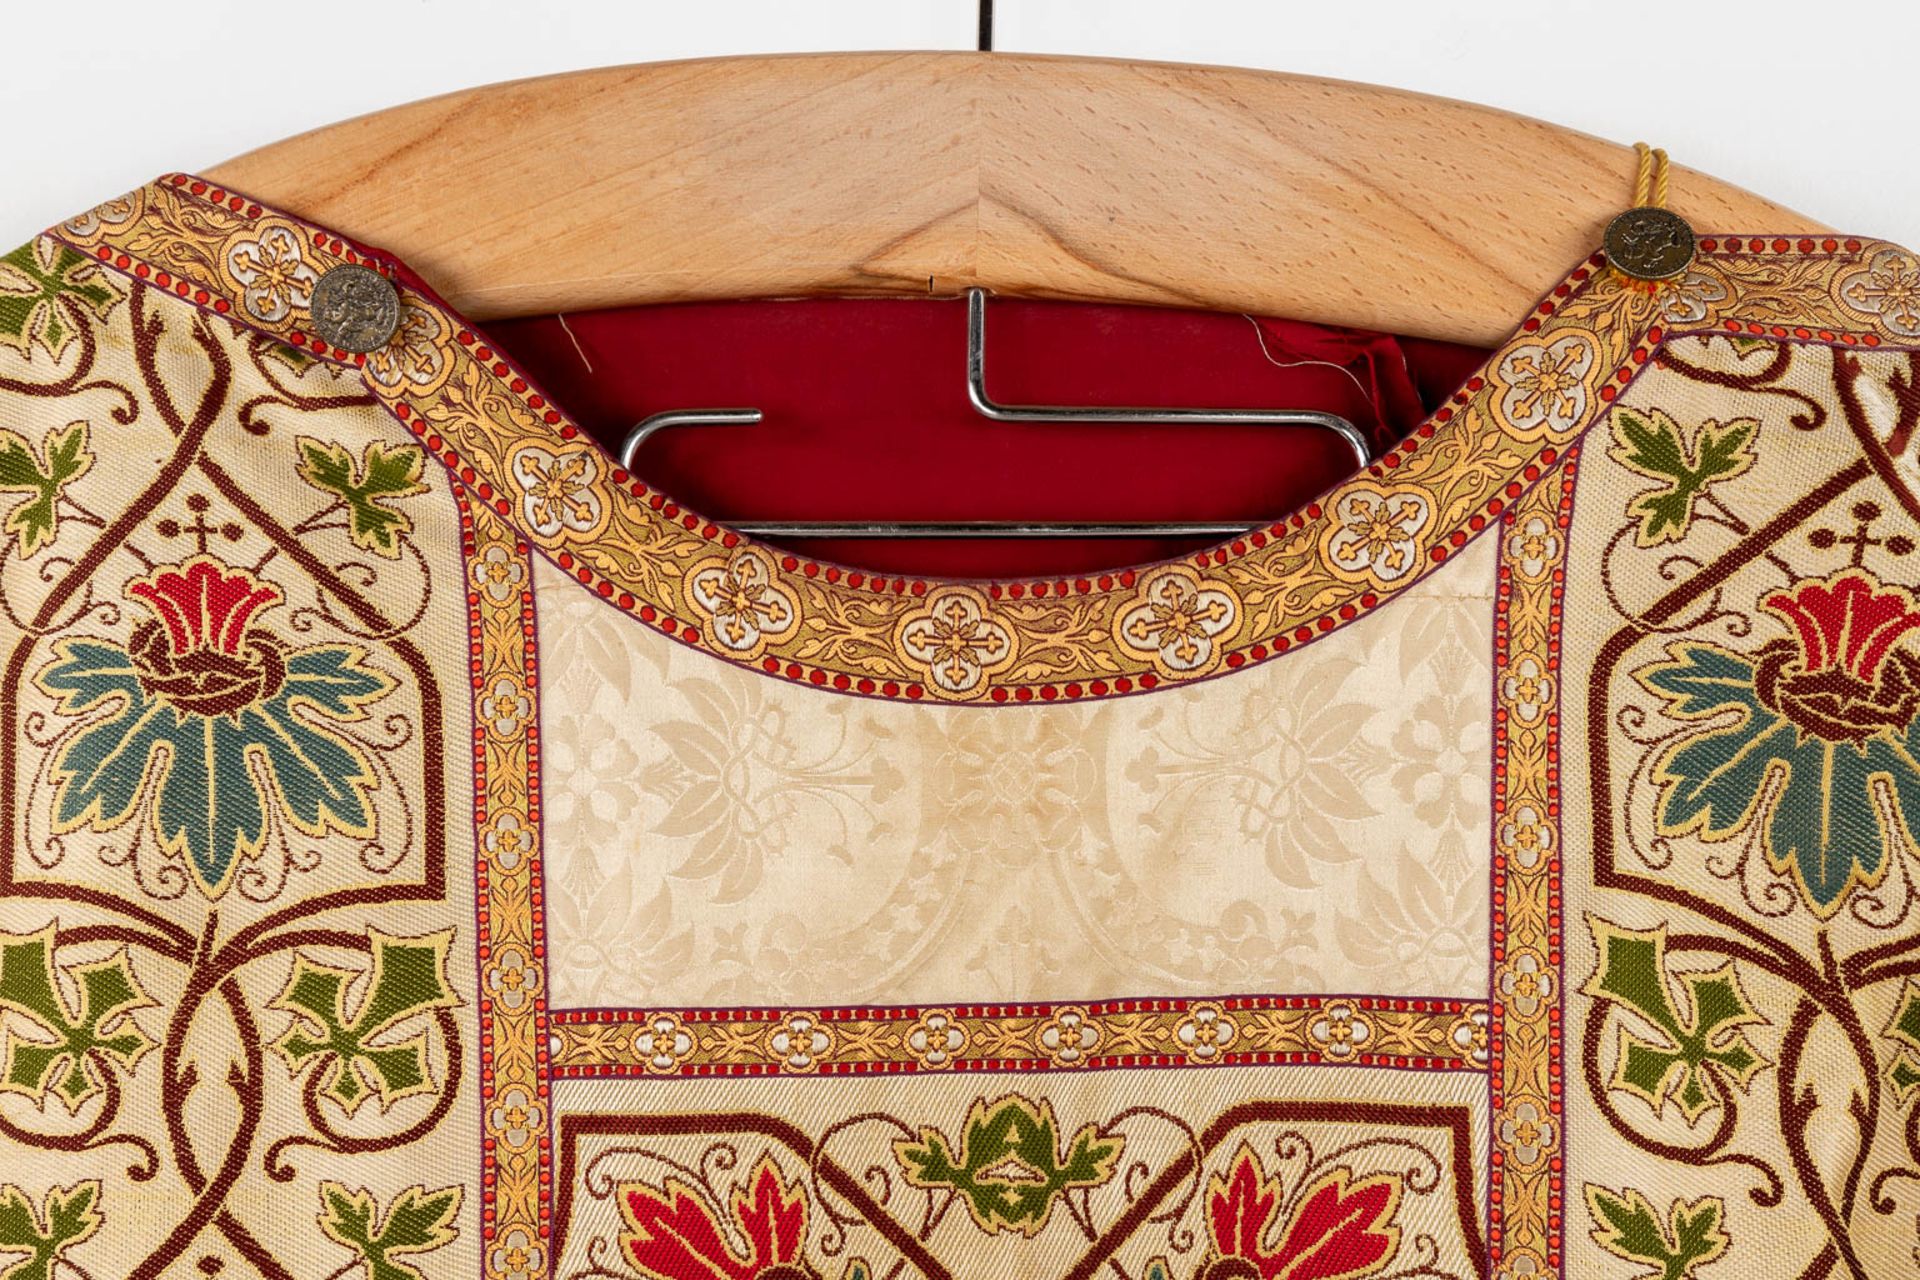 Four Dalmatics, Two Roman Chasubles, A stola and Chalice Veil, finished with embroideries. - Image 9 of 59